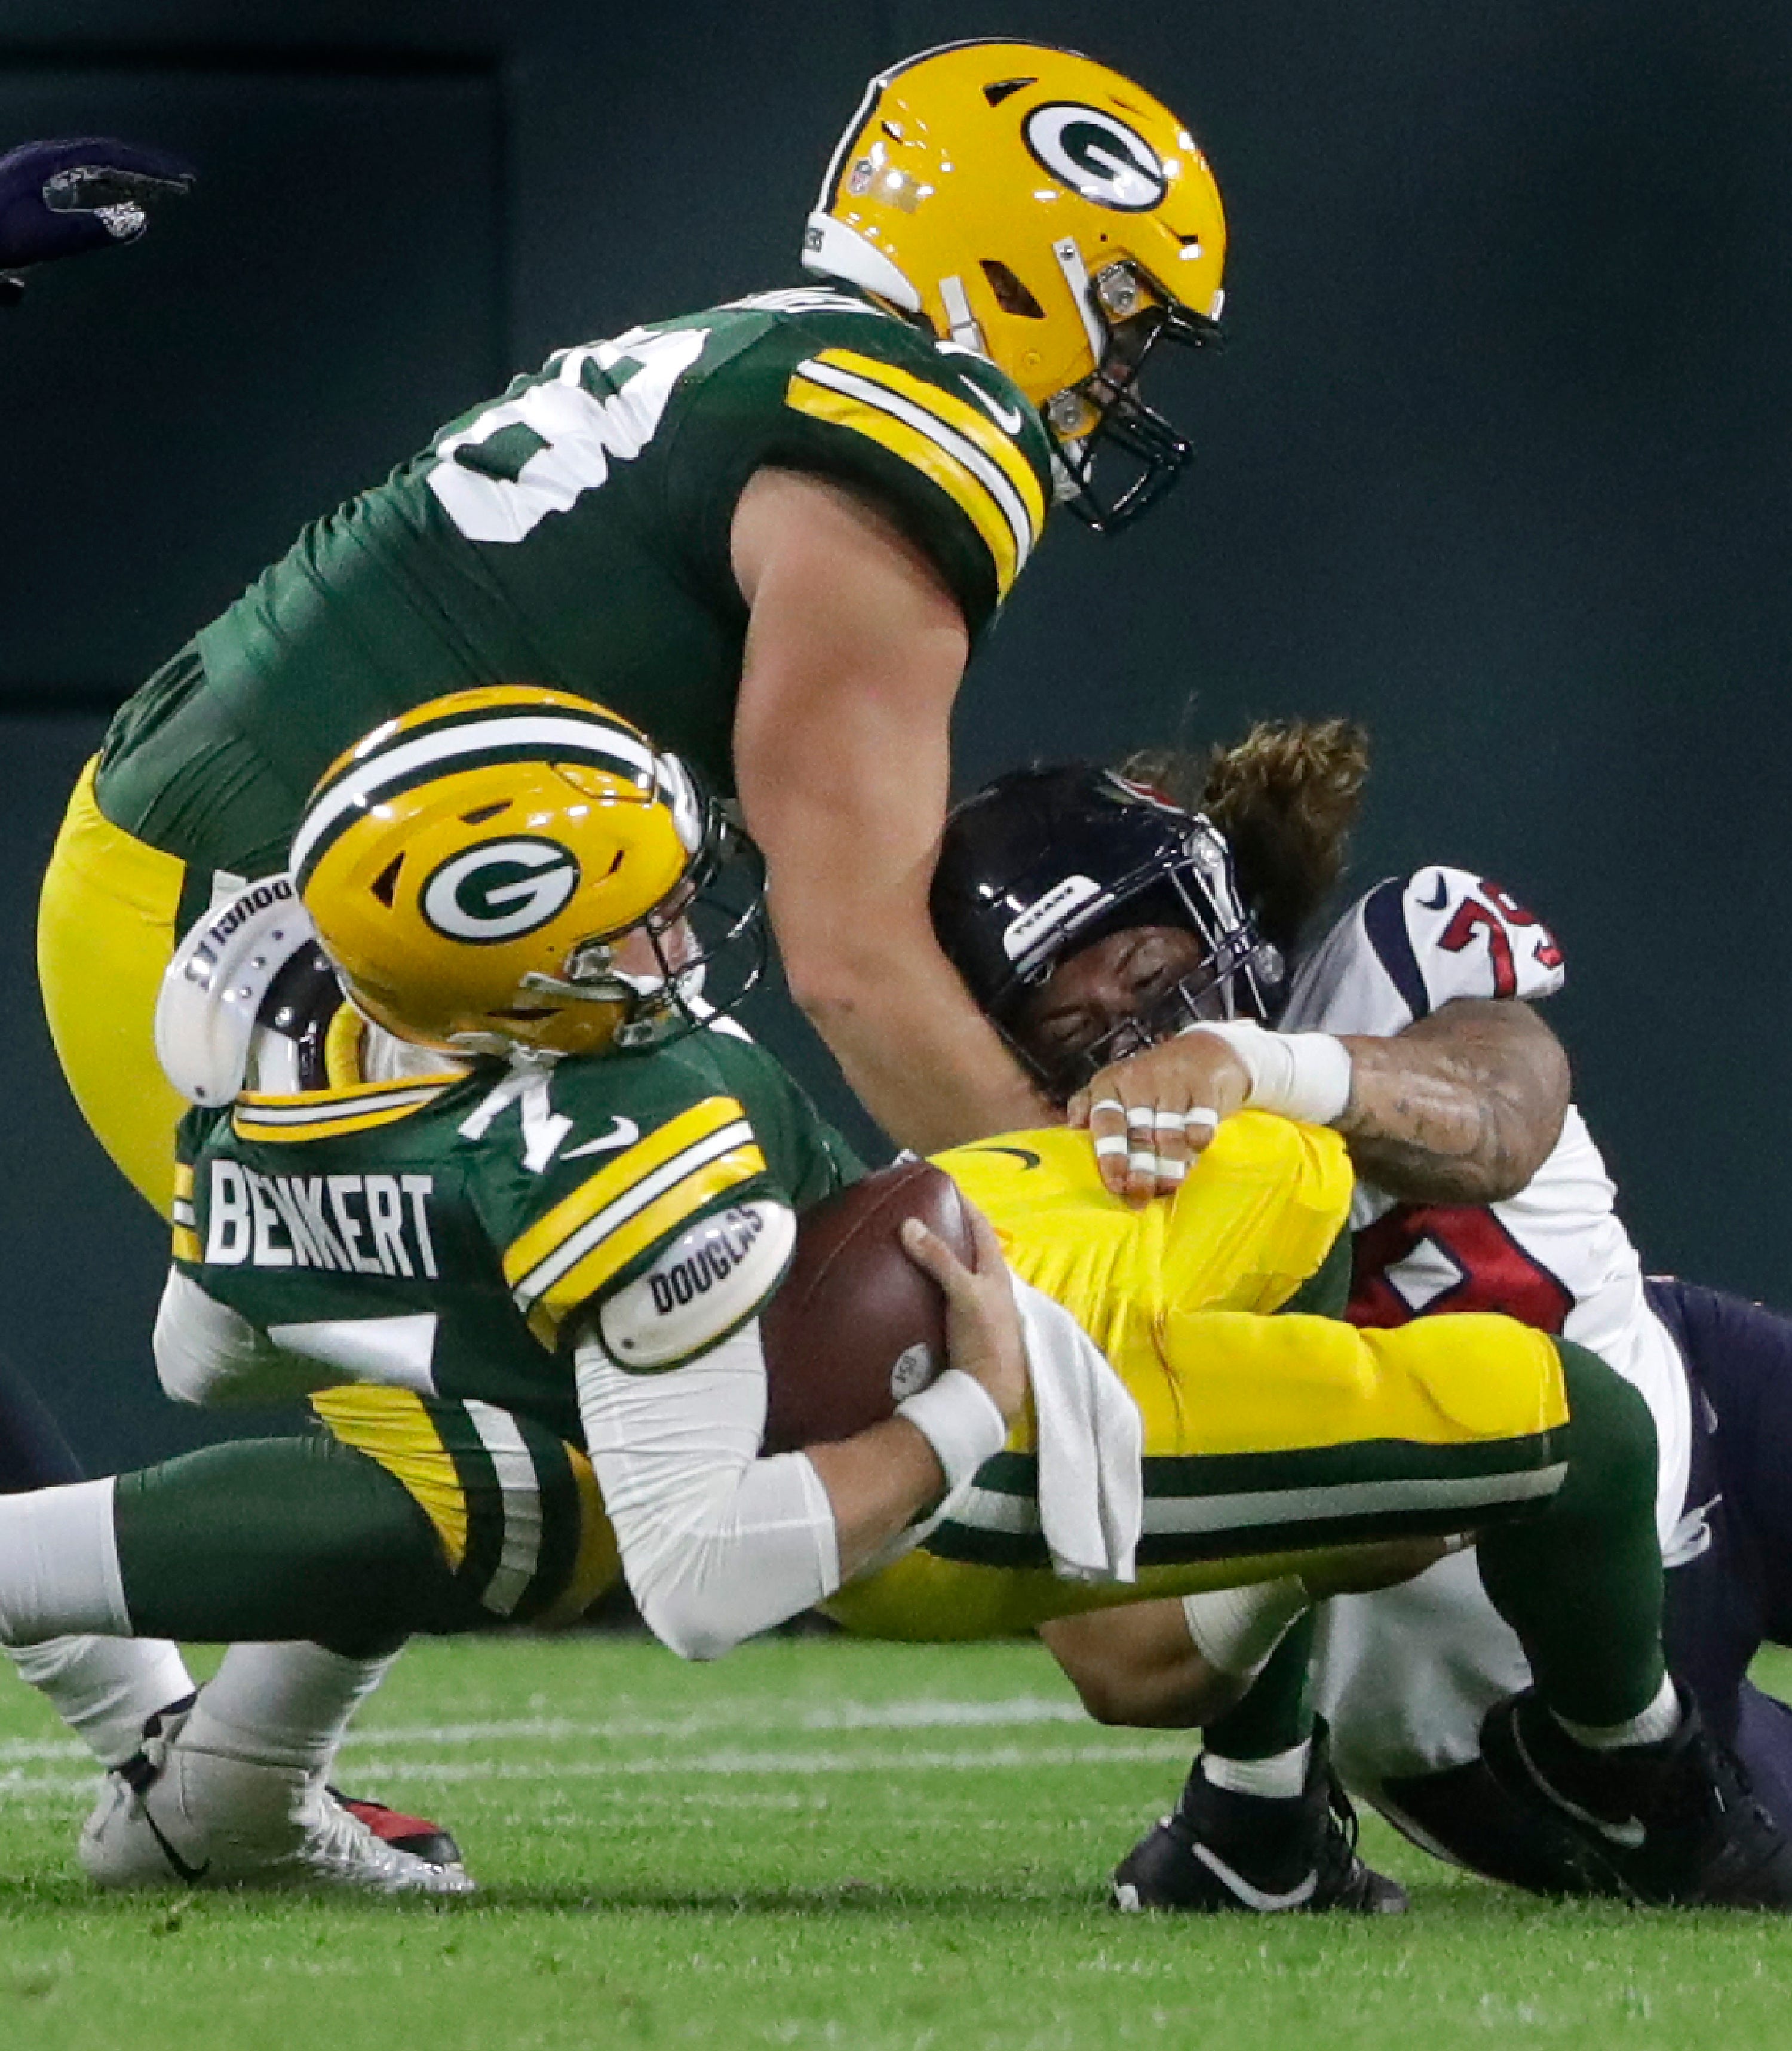 Green Bay Packers quarterback Kurt Benkert (7) is sacked by Houston Texans defensive tackle Roy Lopez (79) during their preseason football game at Lambeau Field in Green Bay.